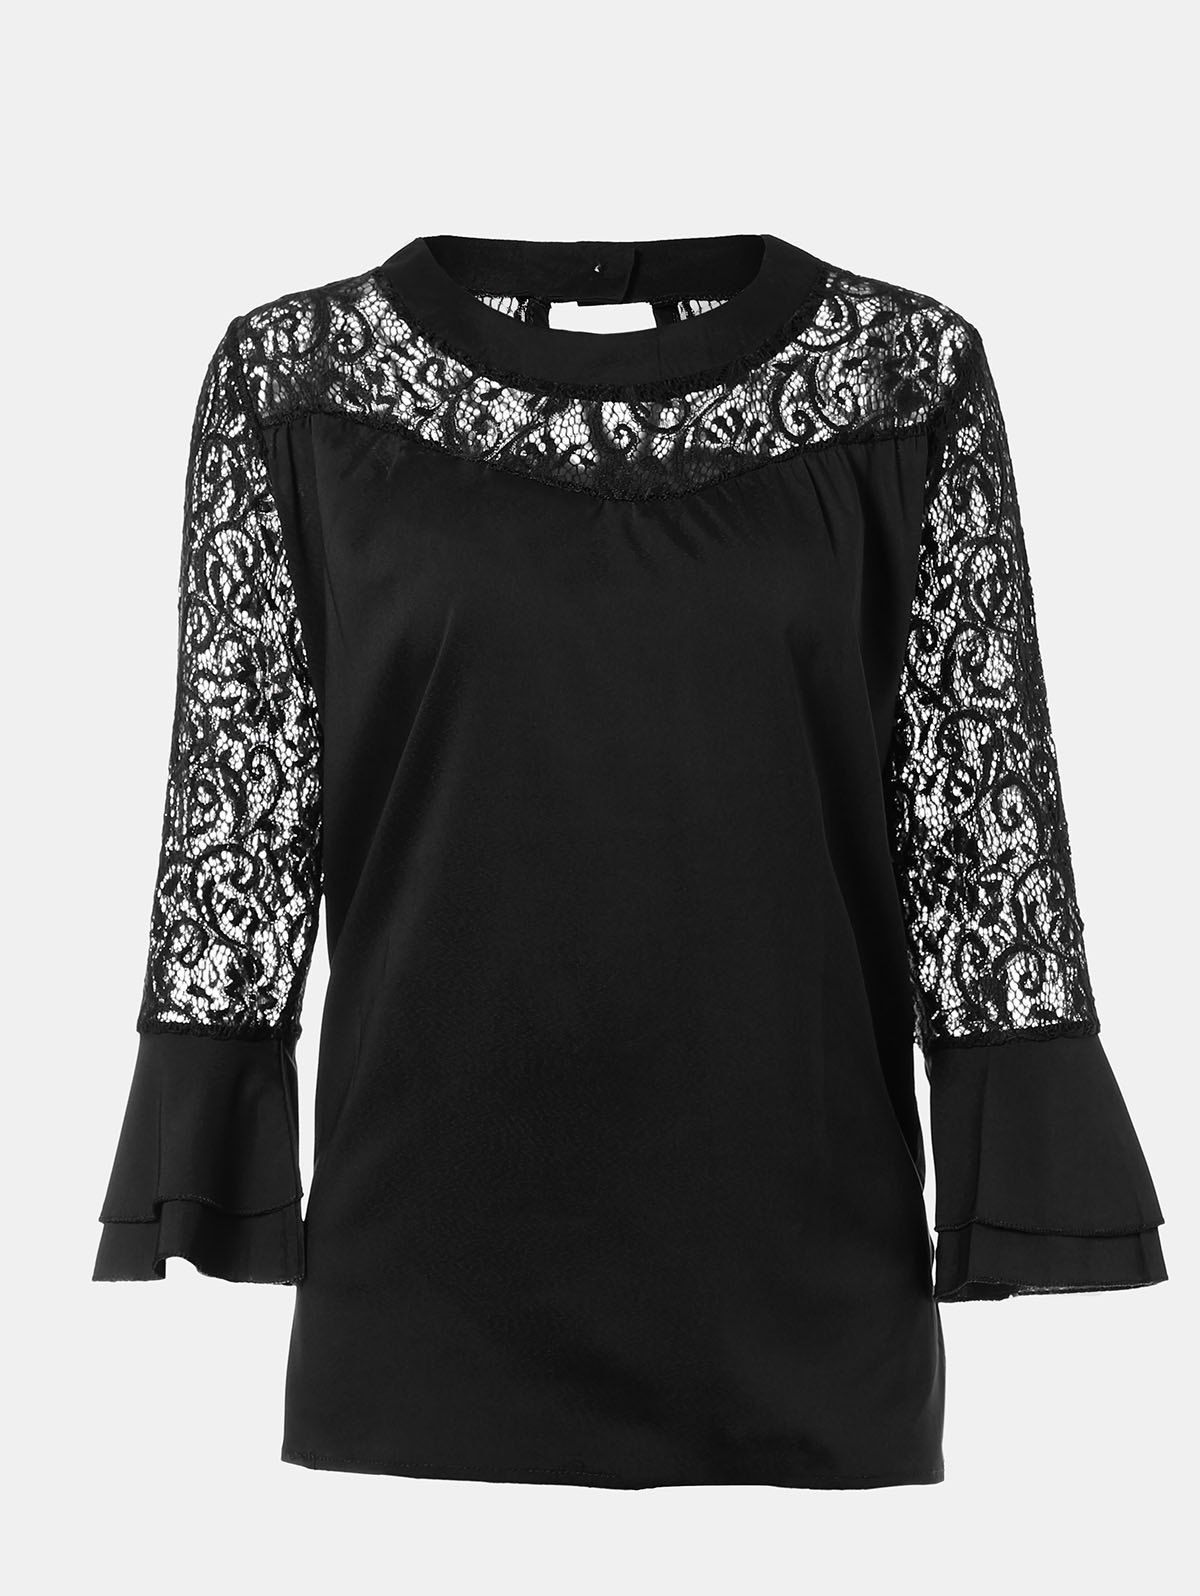 Women's Casual Lace Patchwork Chiffon  Tops - BLACK S